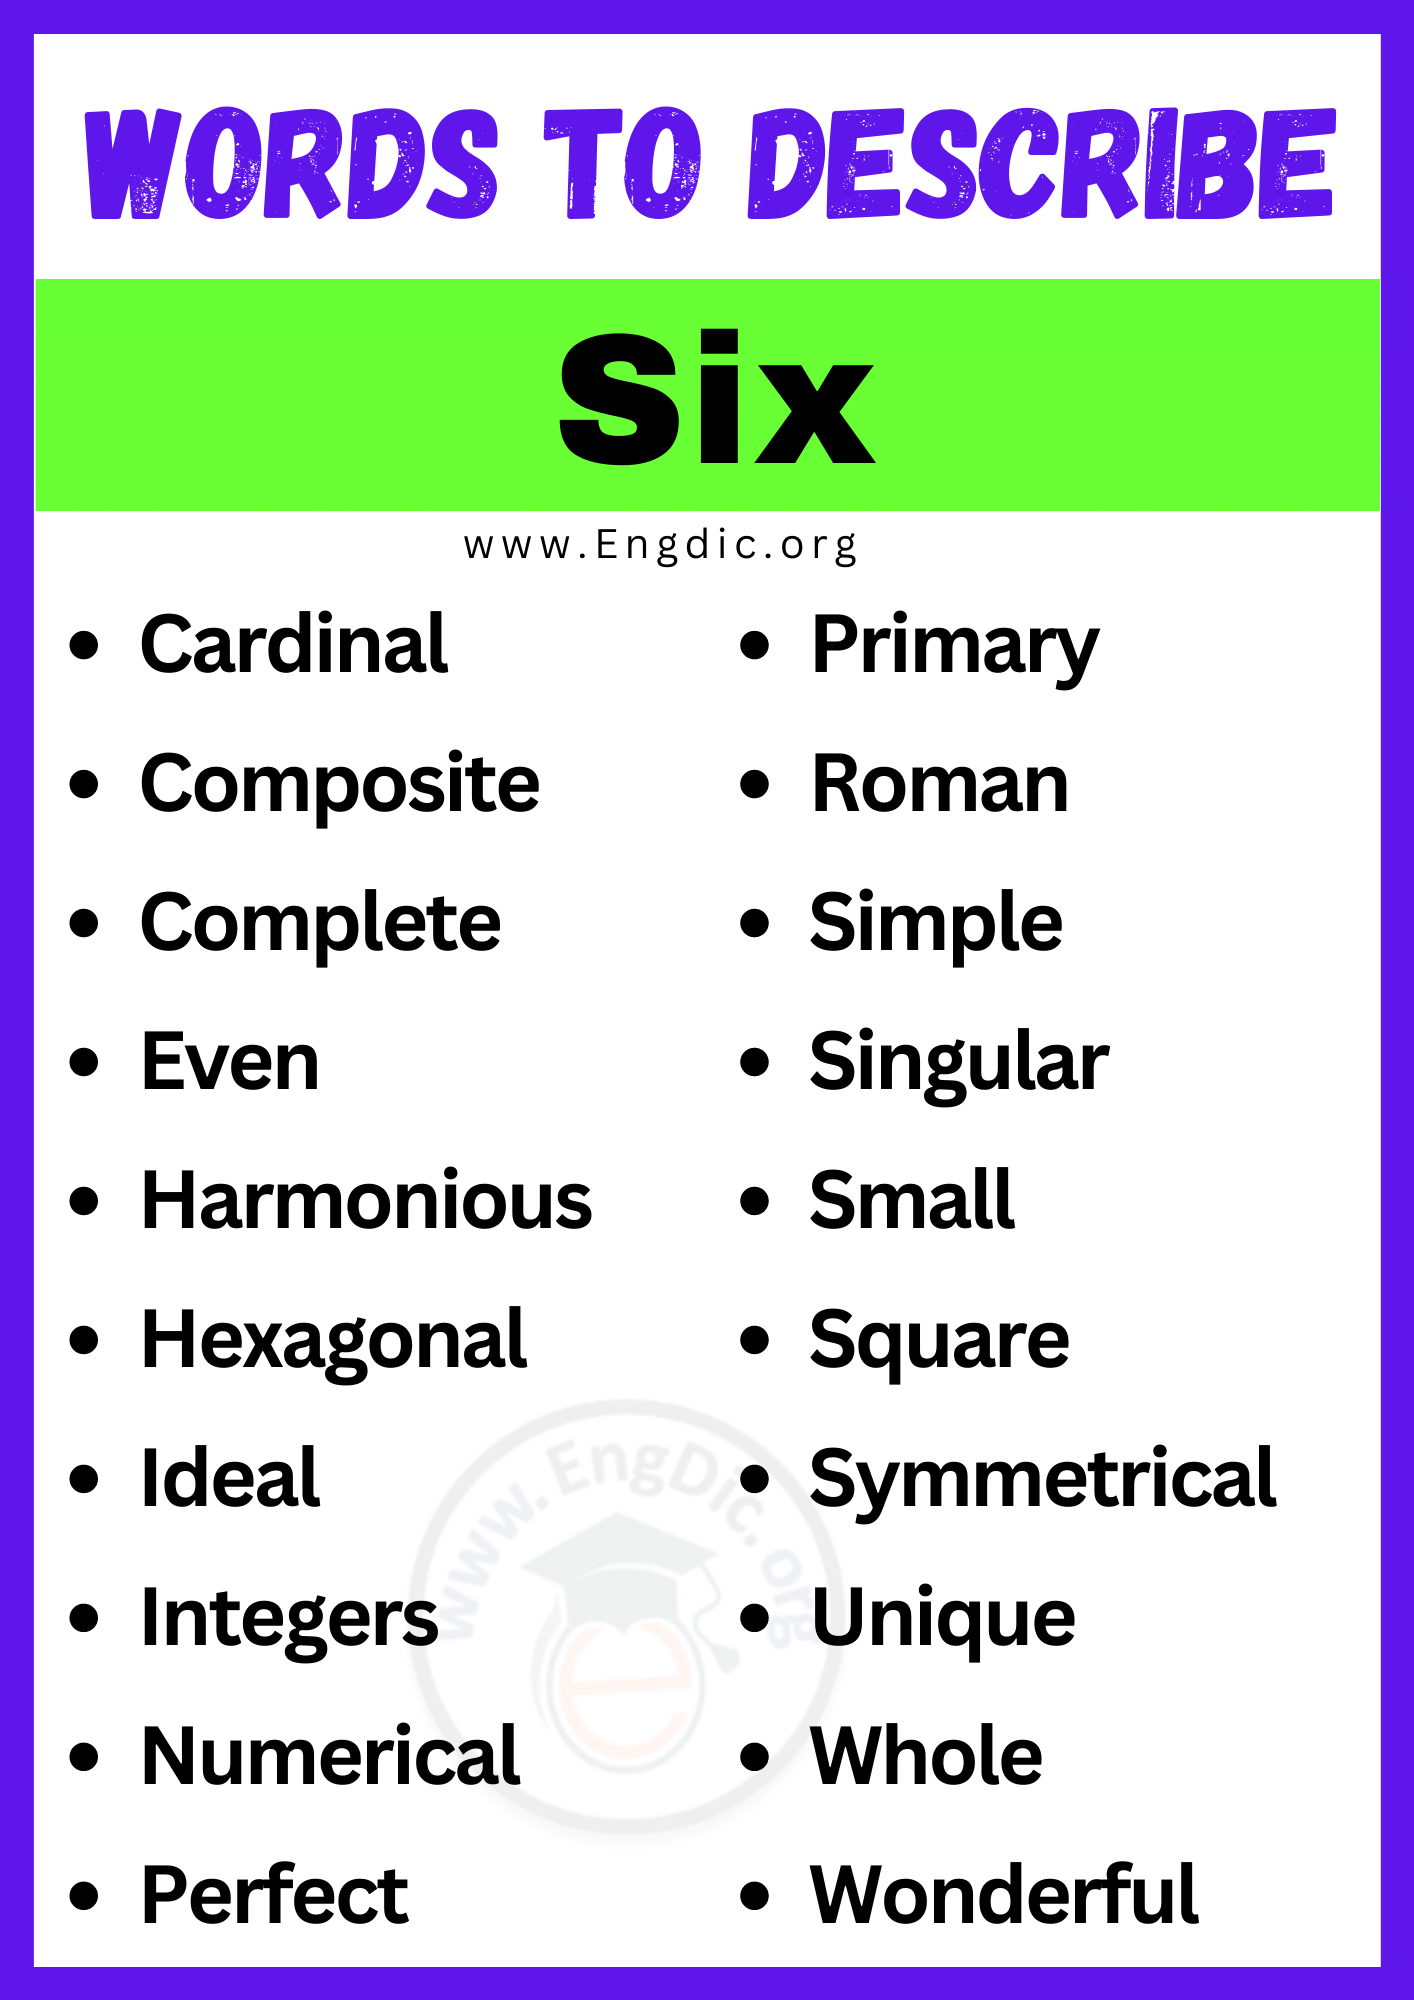 Words to Describe Six